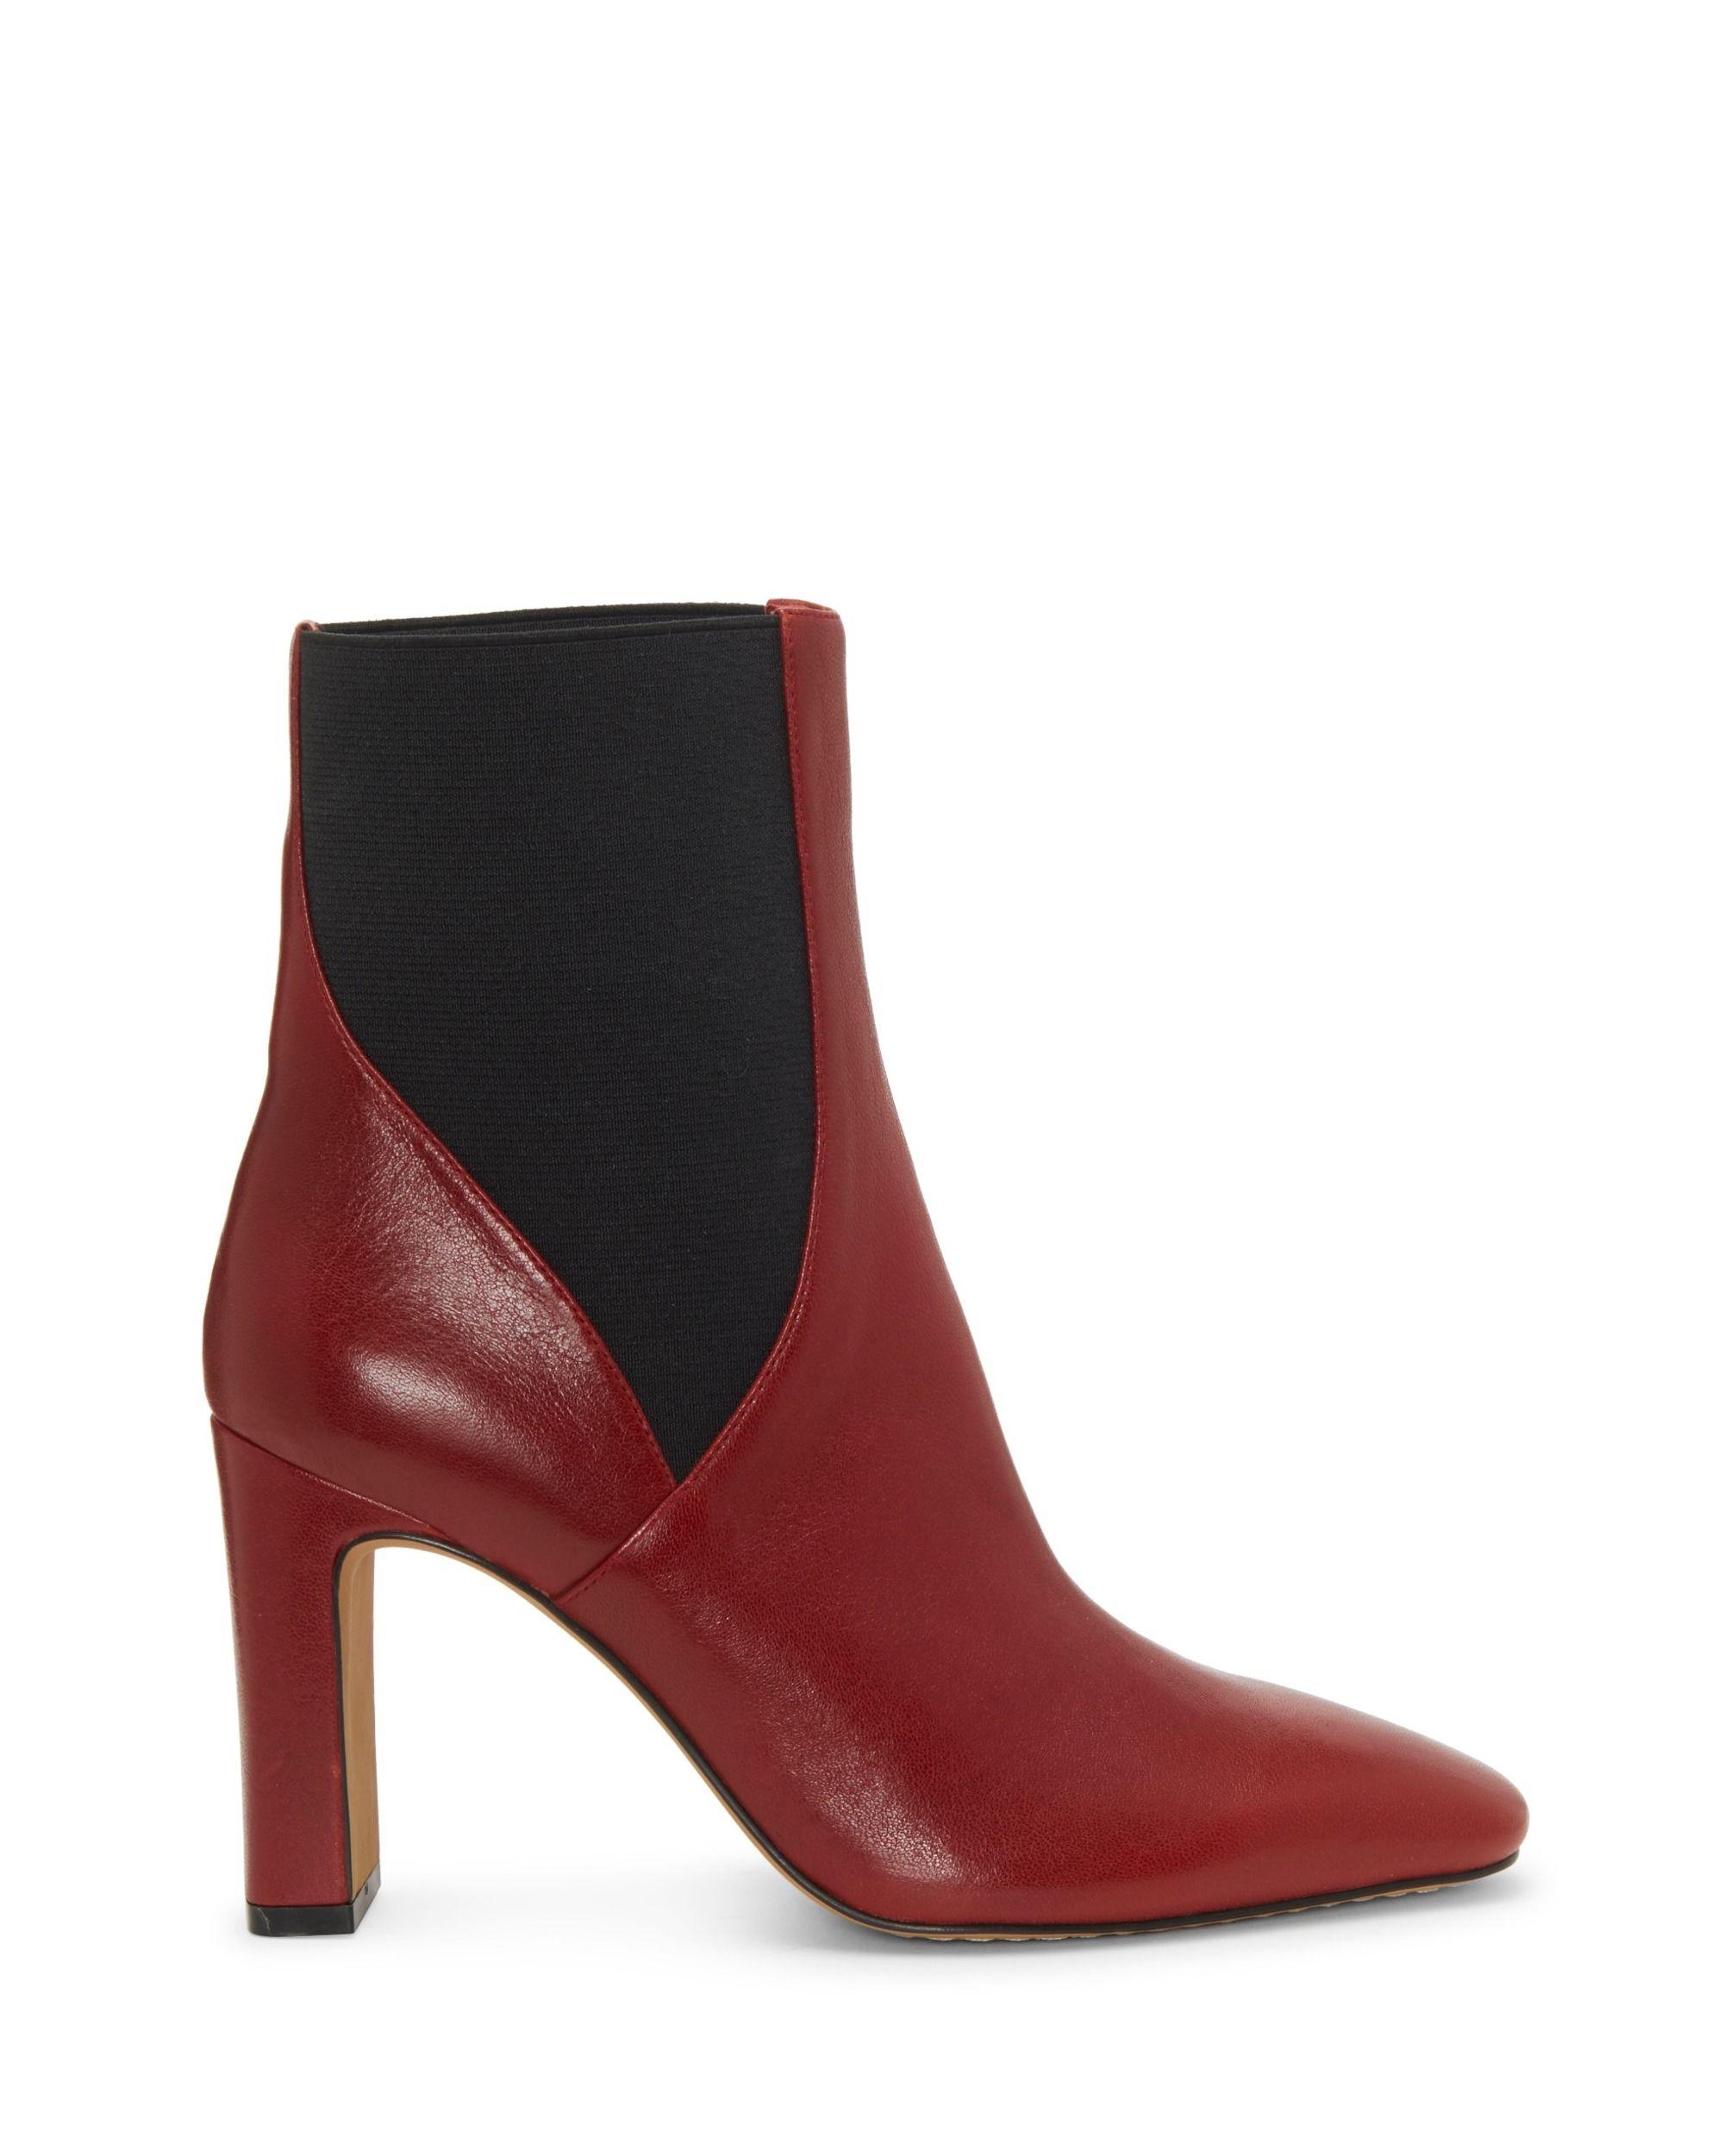 Vince Camuto Leather Seeana Stretch-panel Bootie in Red - Lyst